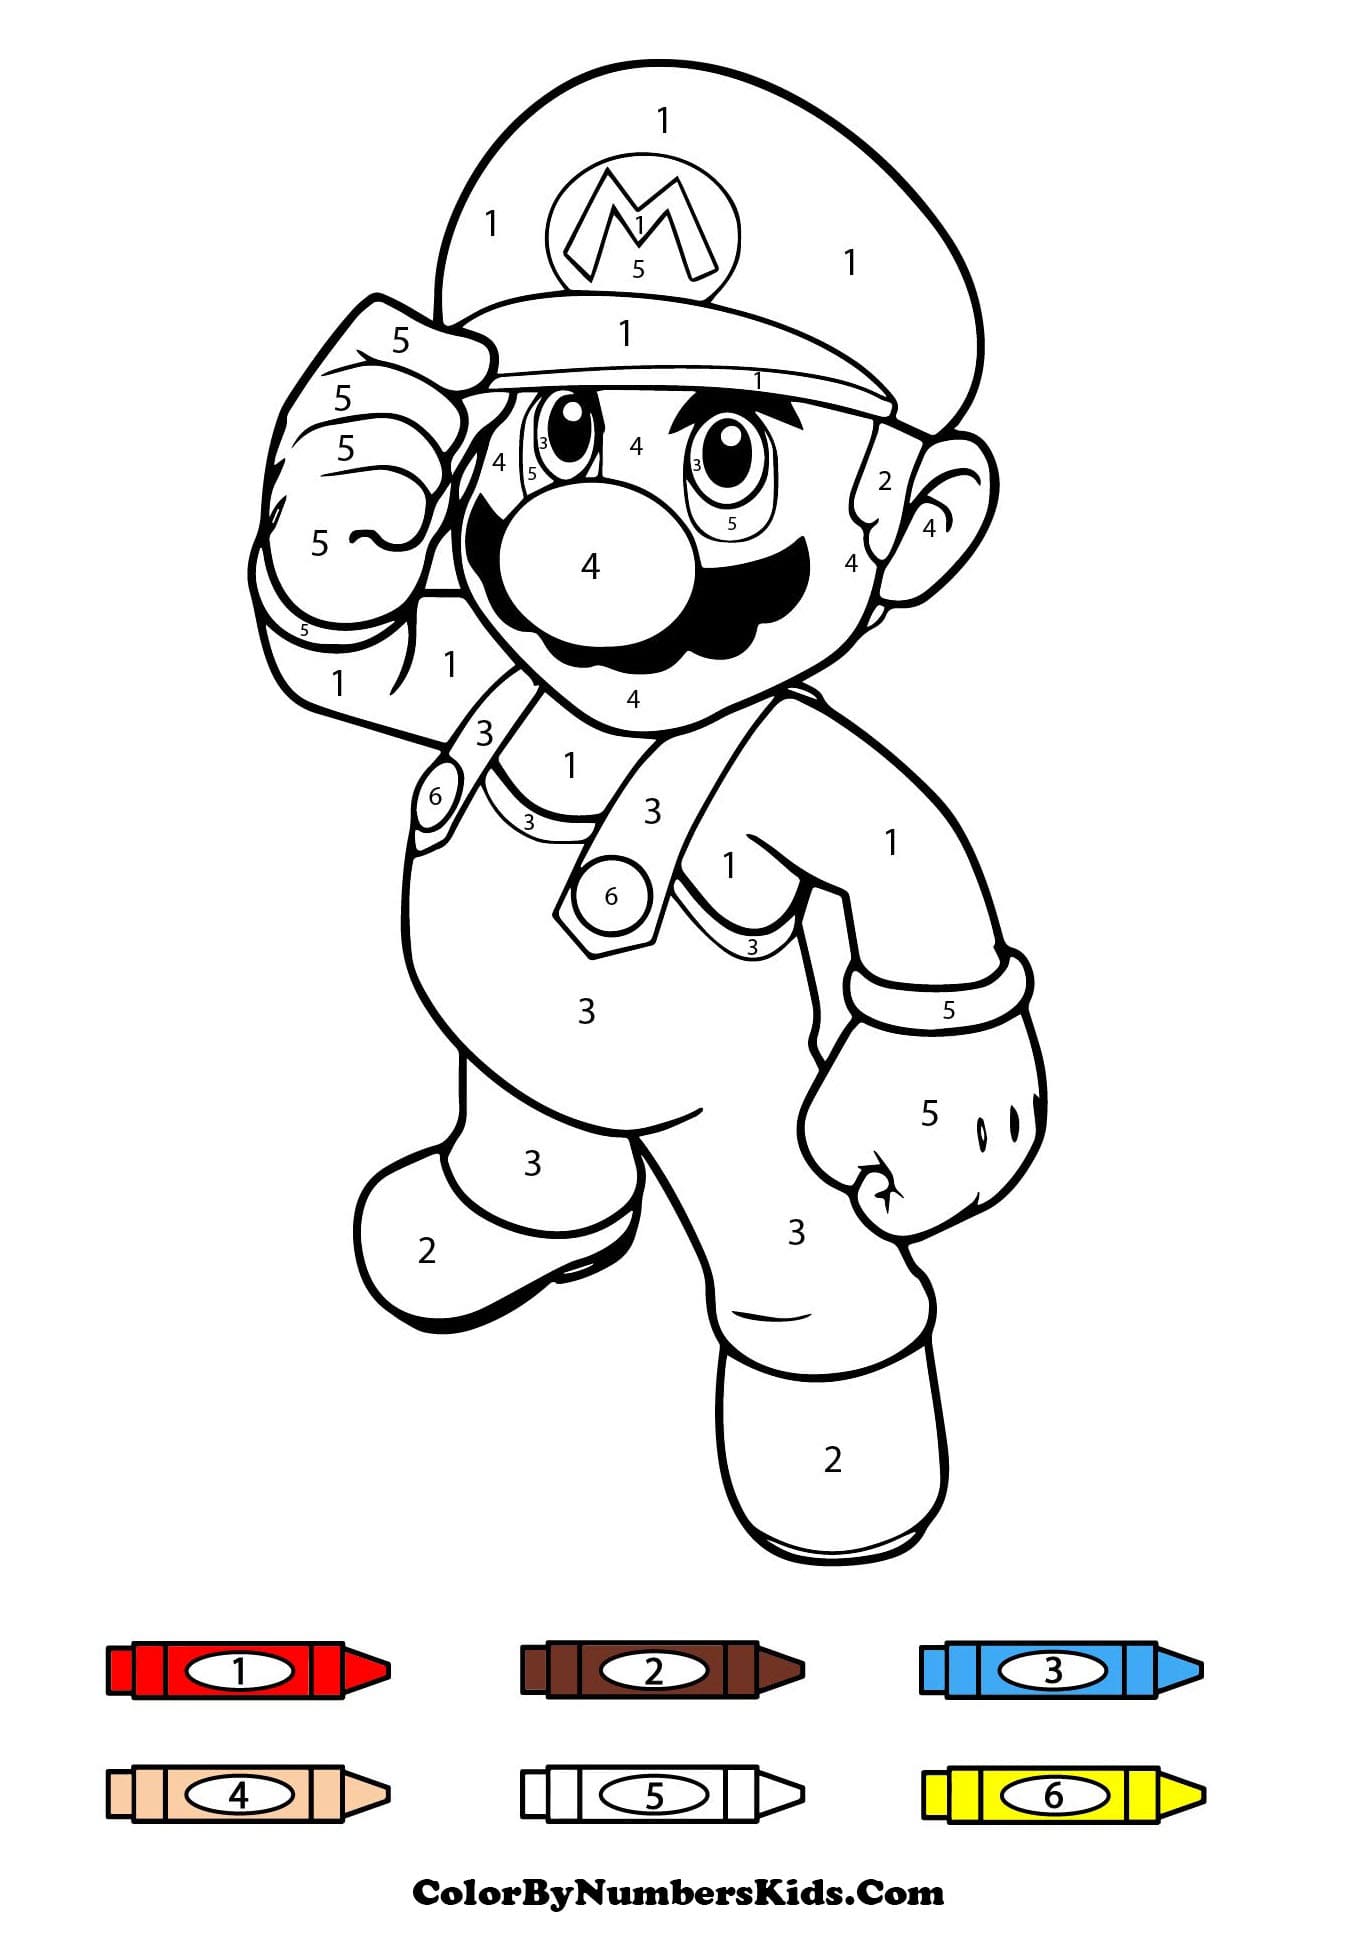 Cool Mario Color By Number